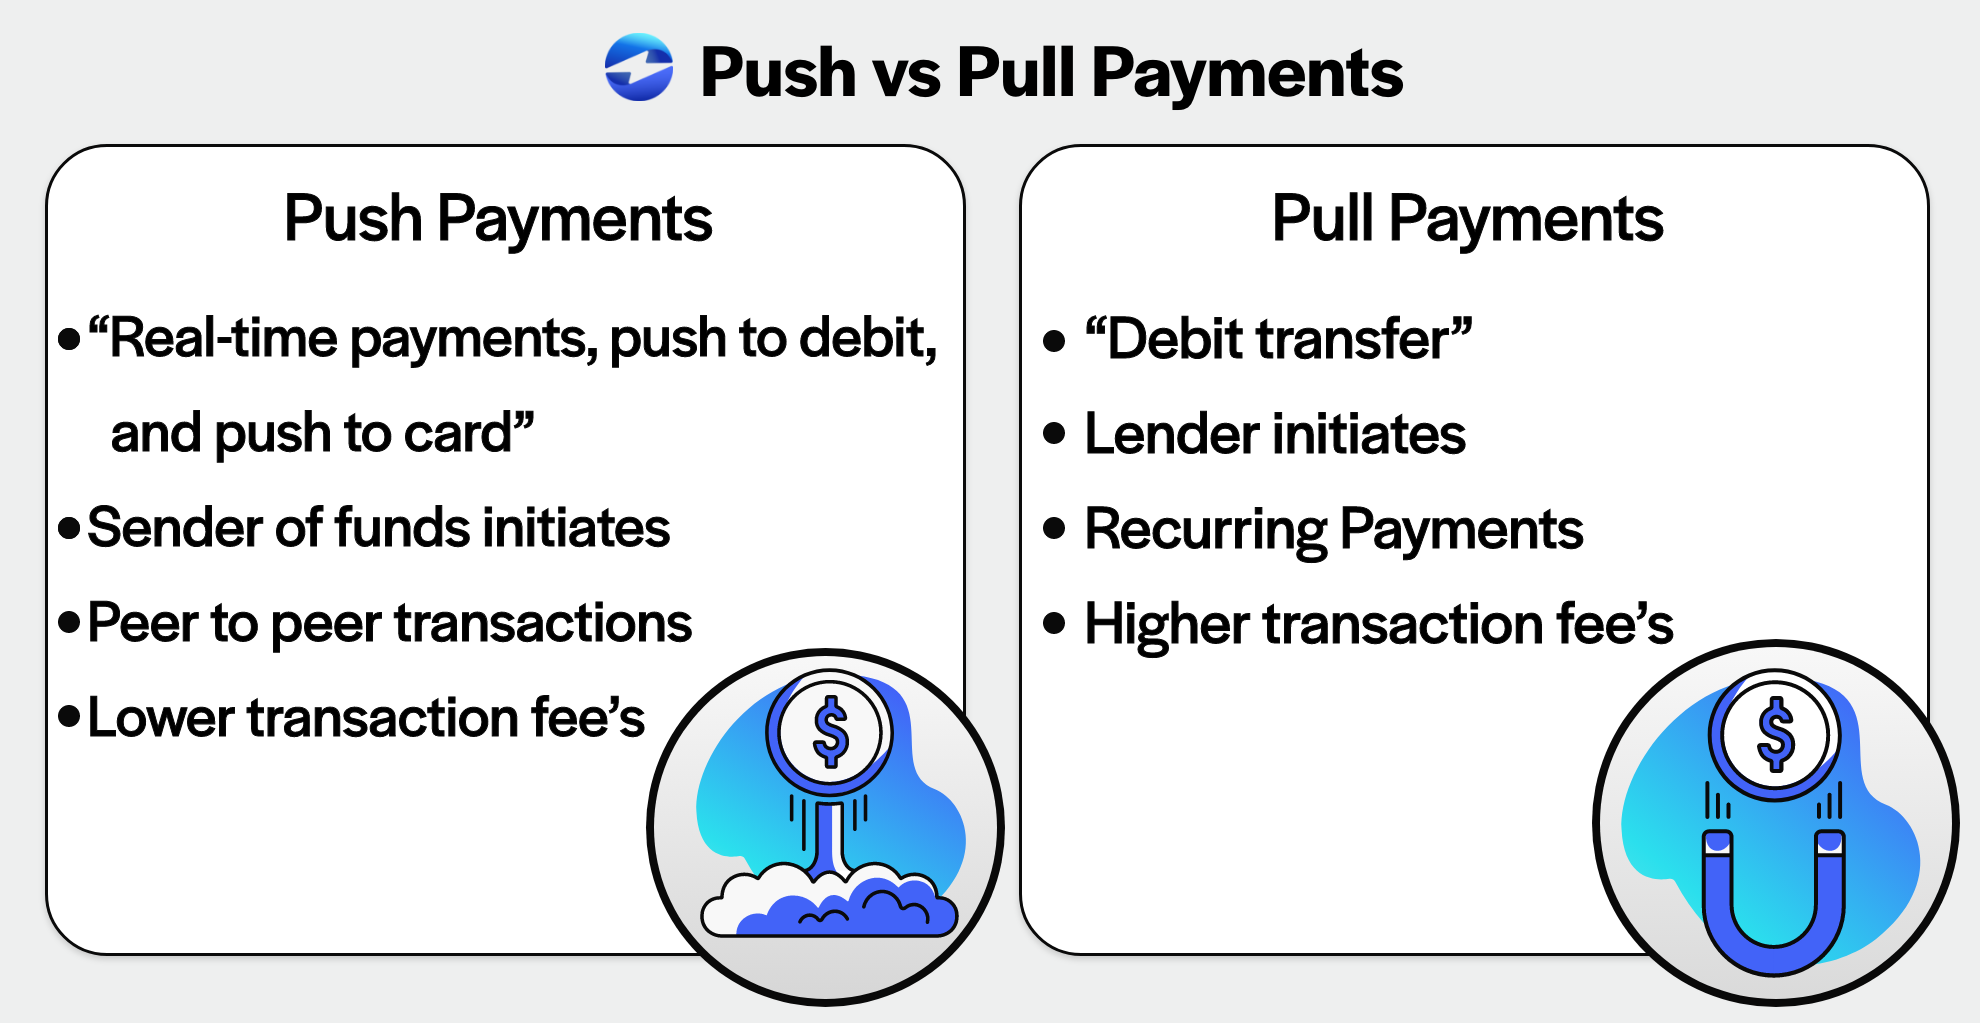 Push payments vs pull payments